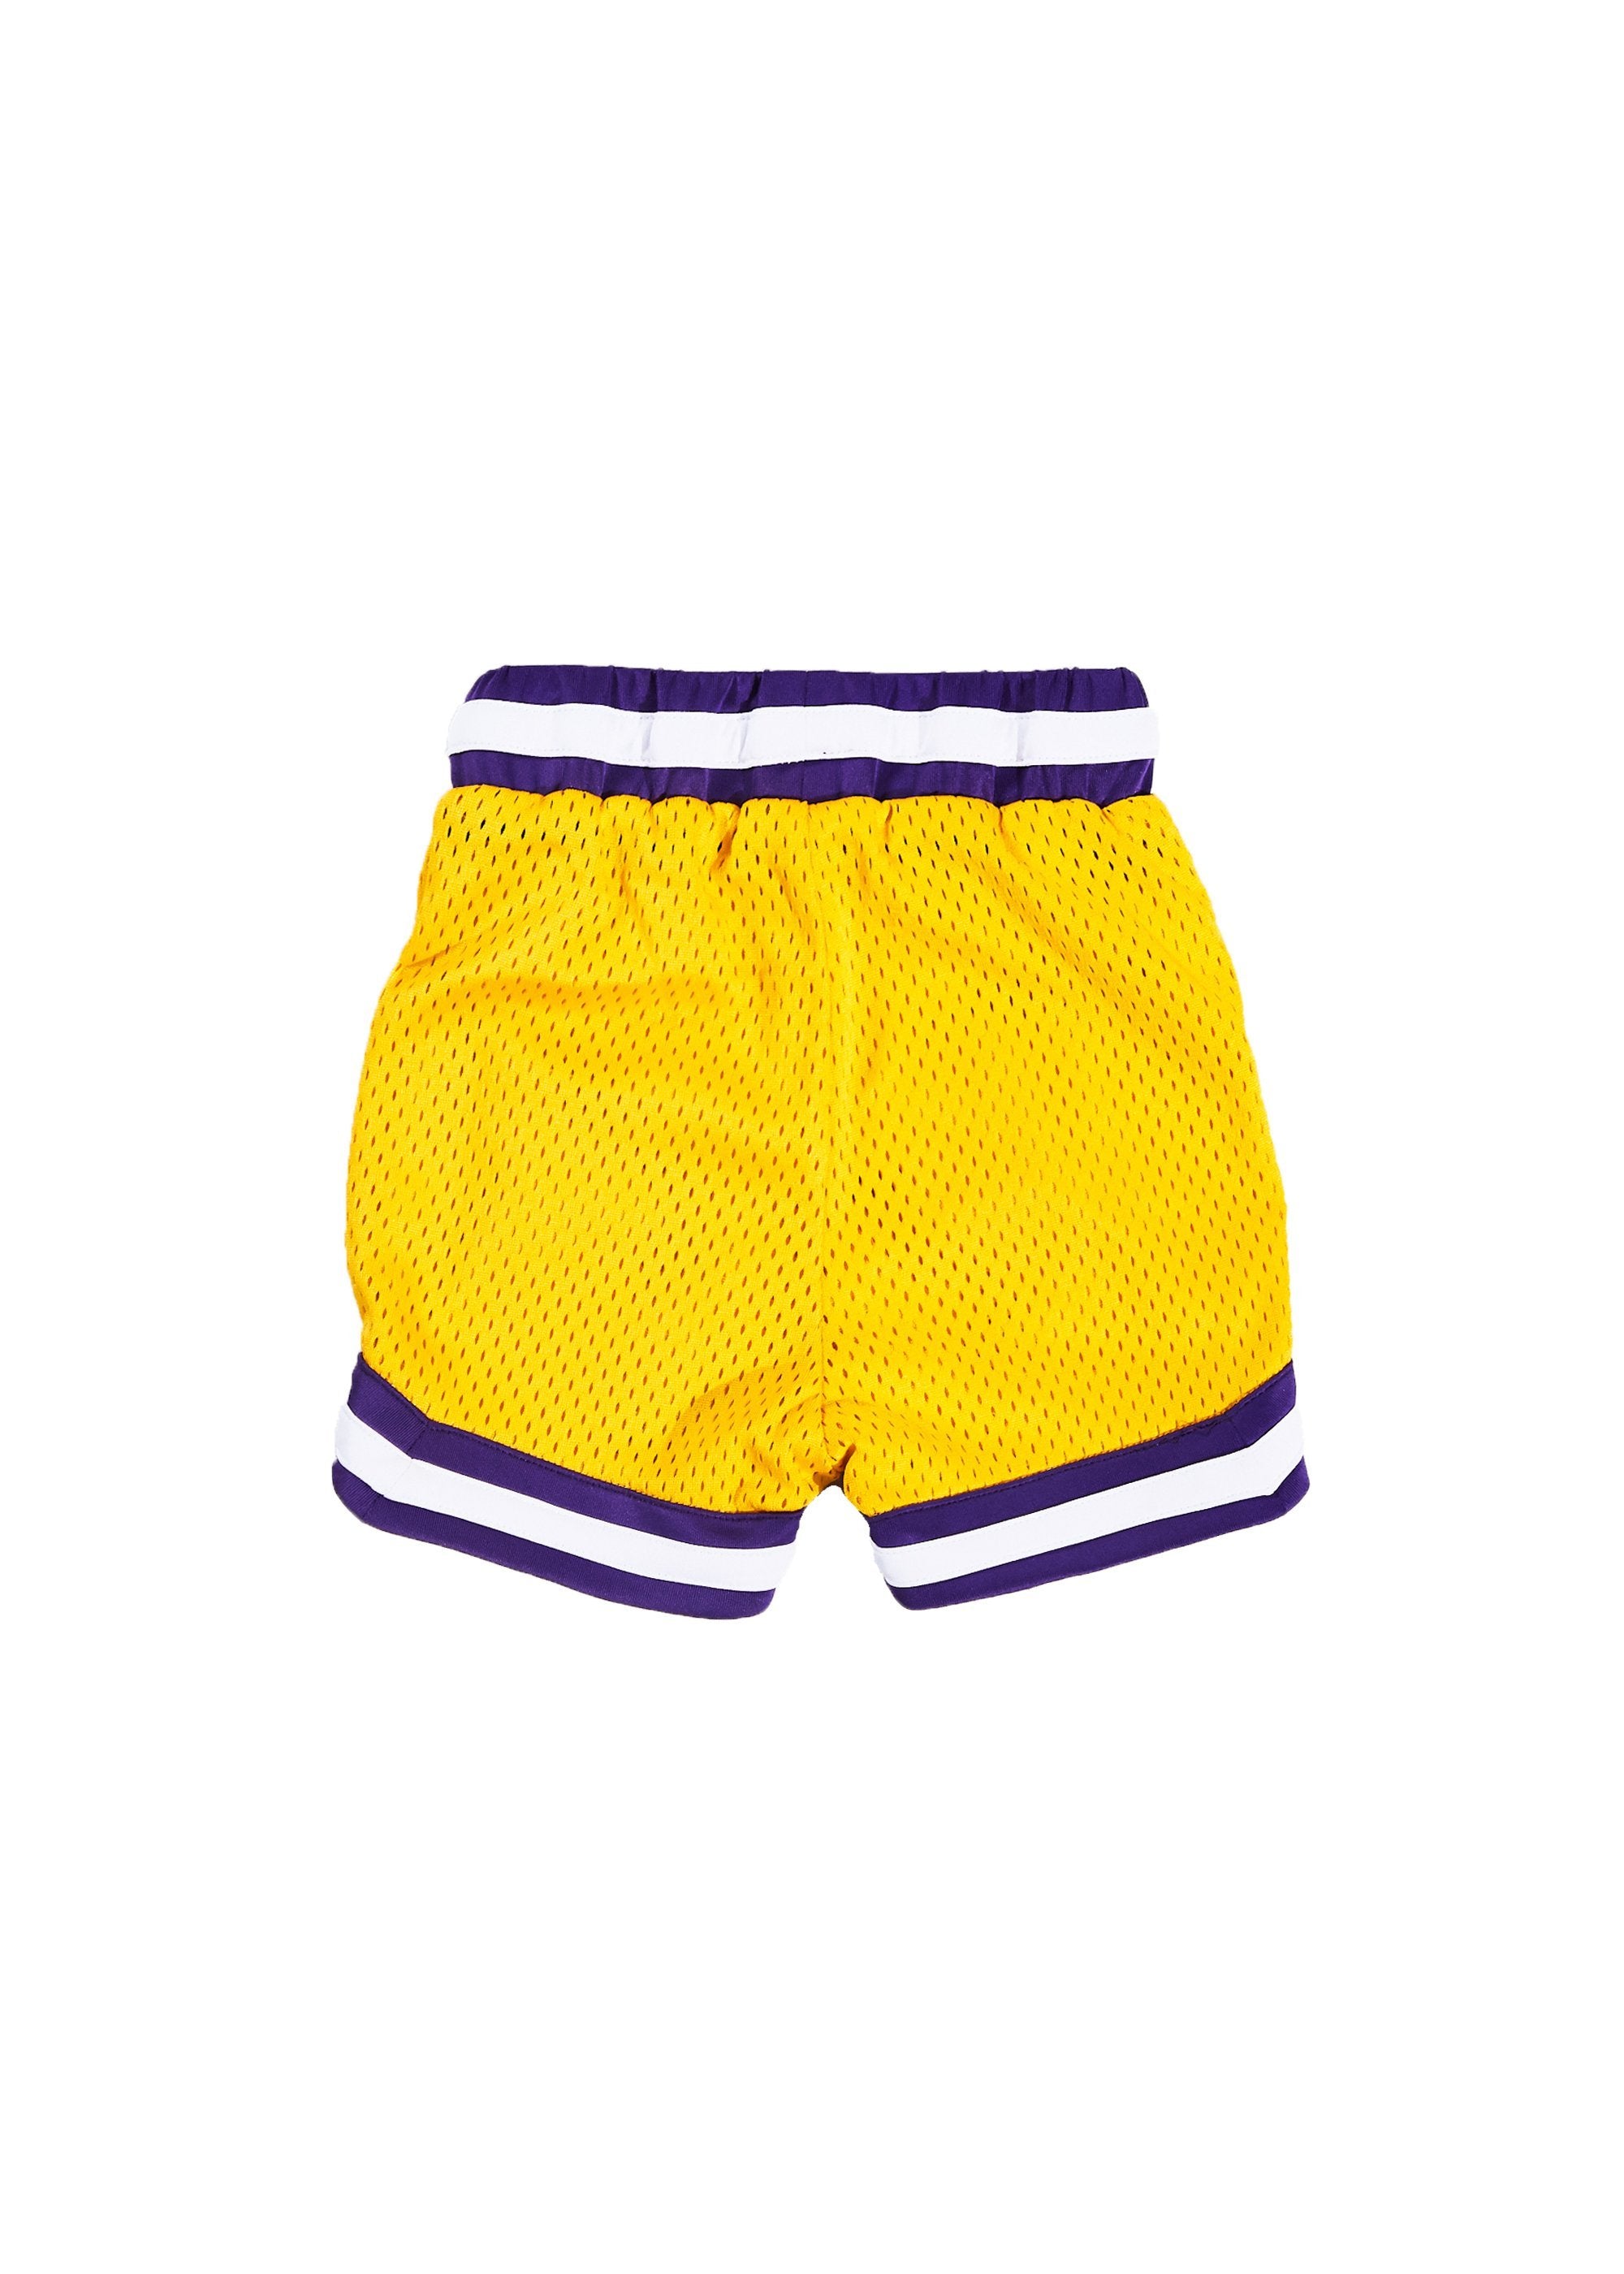 Wyst Basketball Shorts (Lakers Yellow) - Haus of JR